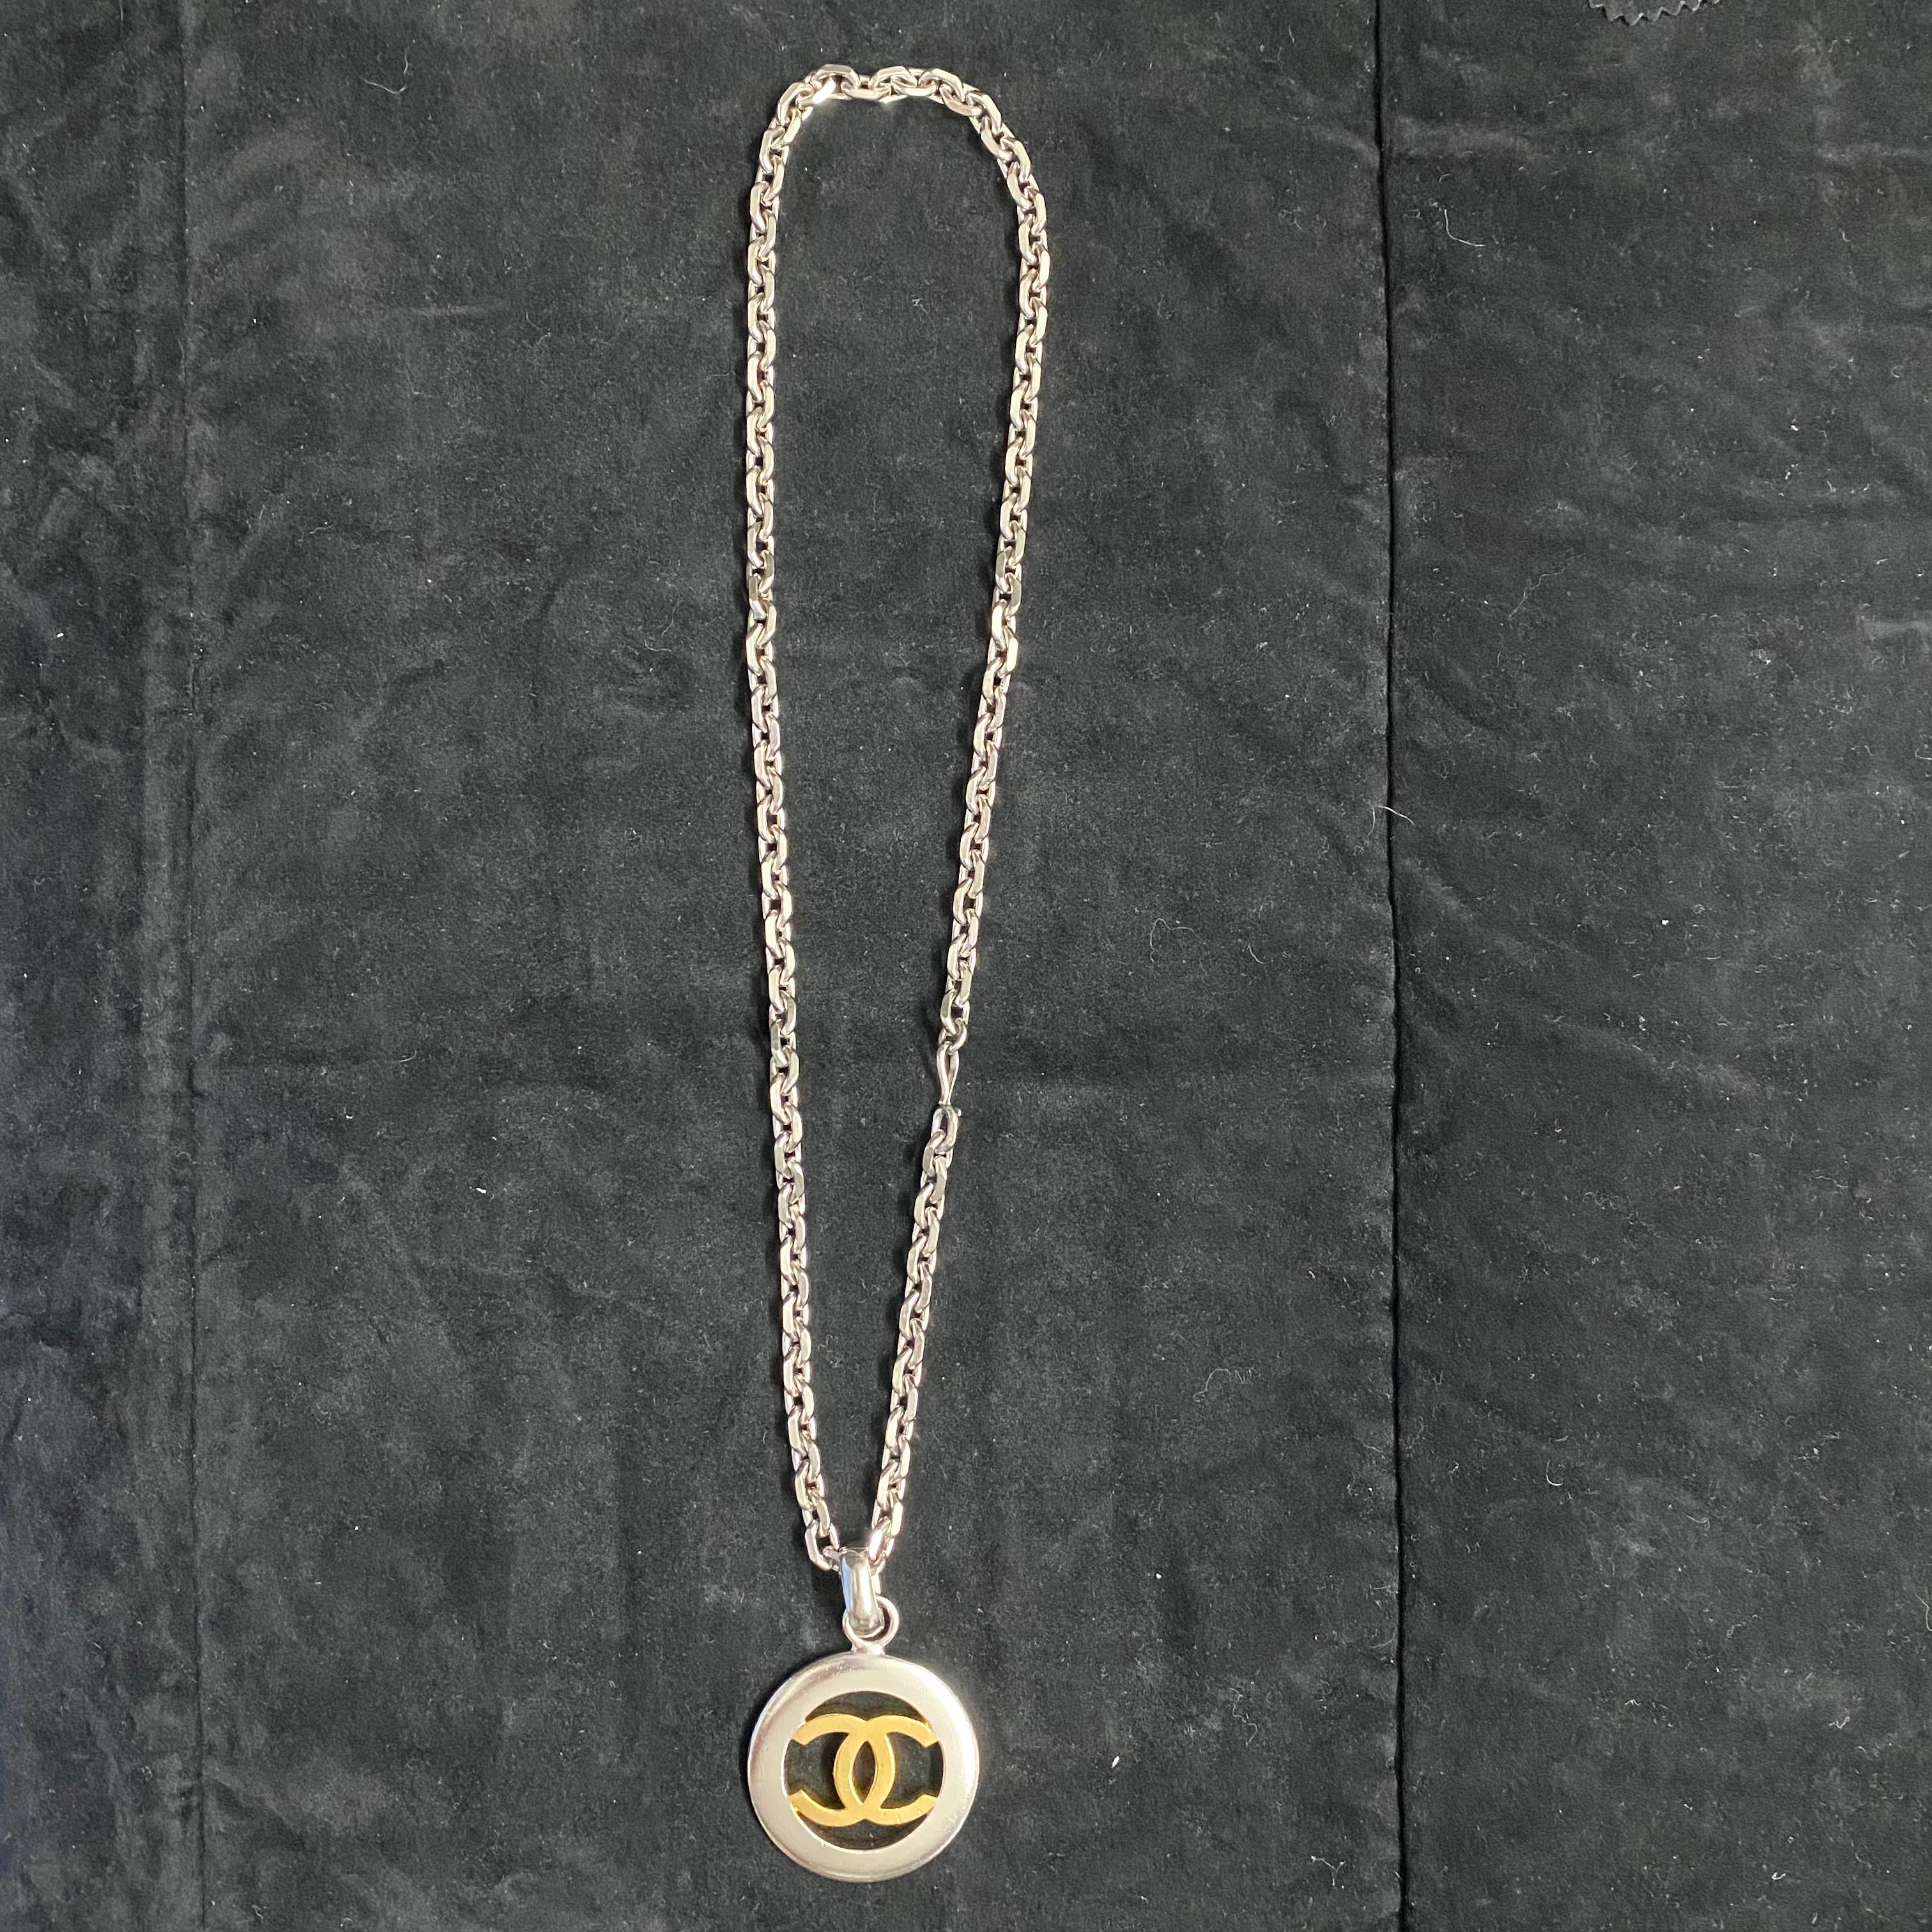 Chanel Vintage Necklace with CC pendant in gold metal, with silver neck chain and a lobster clasp closure. In good condition.